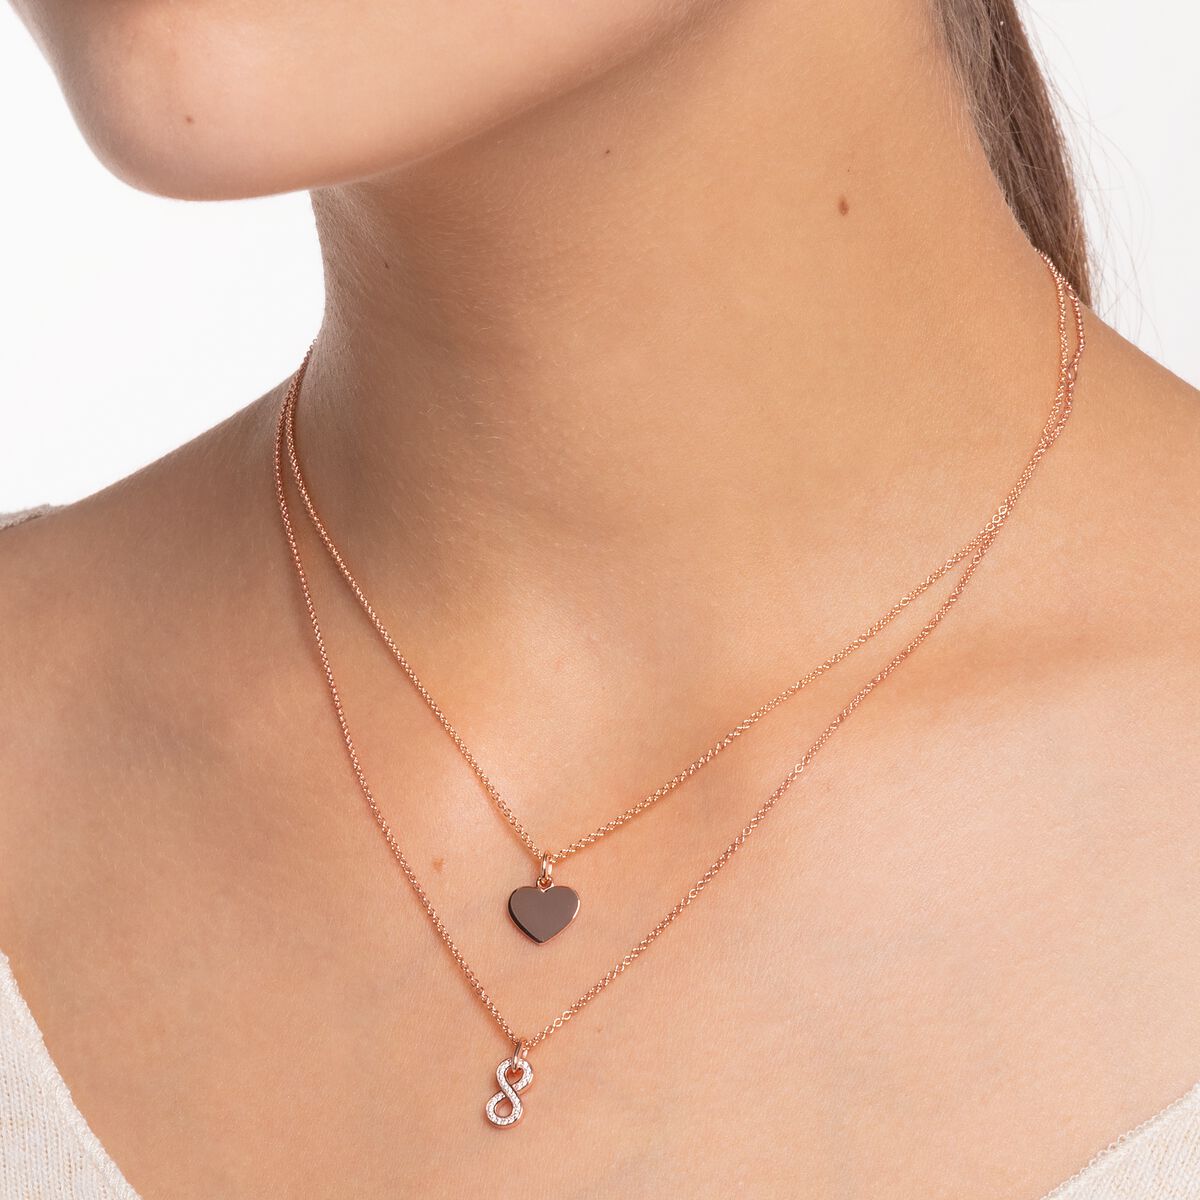 Simple rose gold Choker necklace with studs